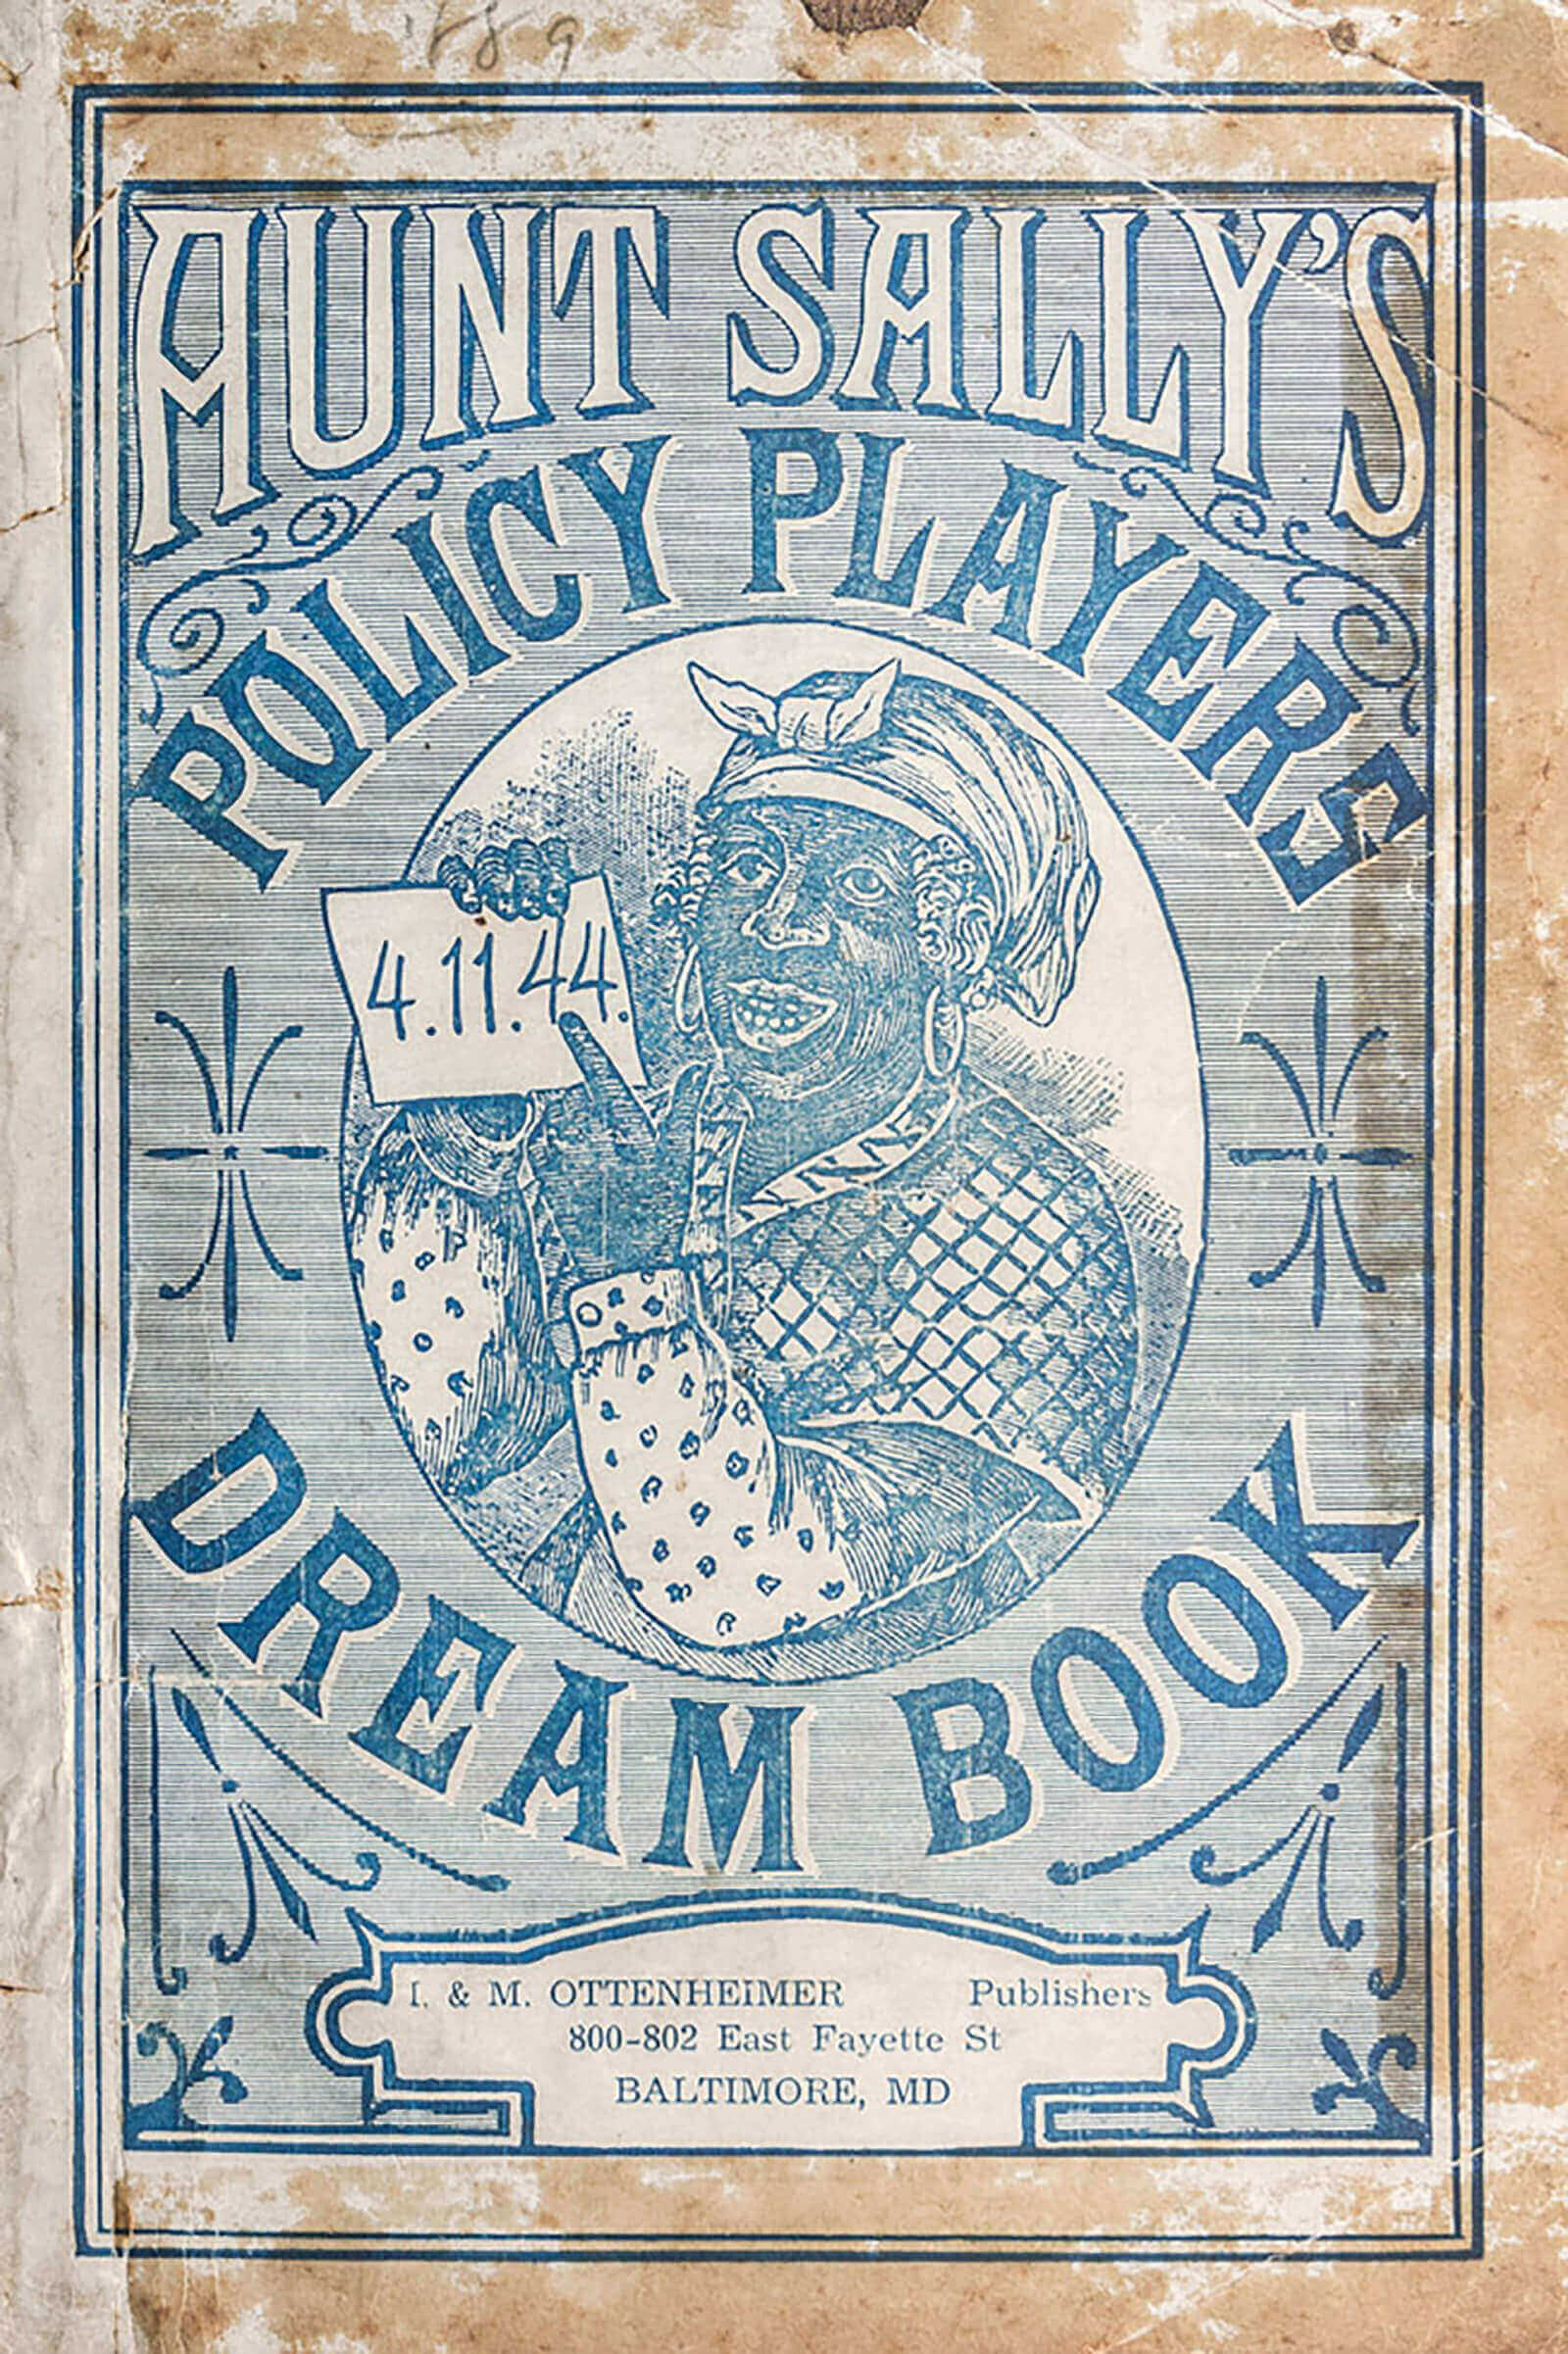 The front cover of “Aunt Sally’s Policy Players Dream Book” the preeminent dream book of the nineteenth century. 